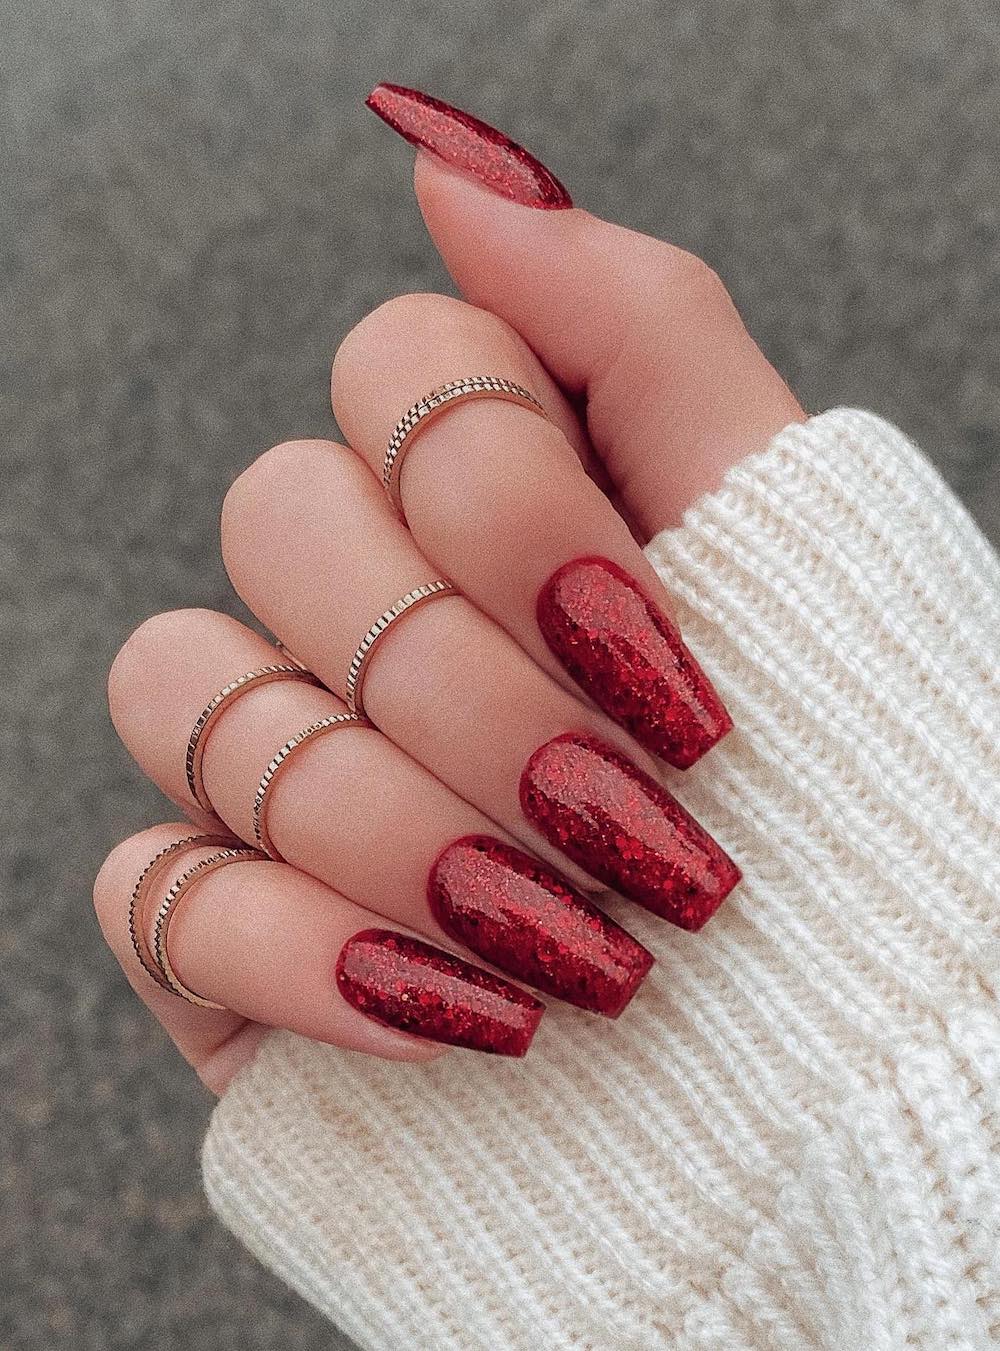 A hand with long coffin nails painted with chunky red glitter polish